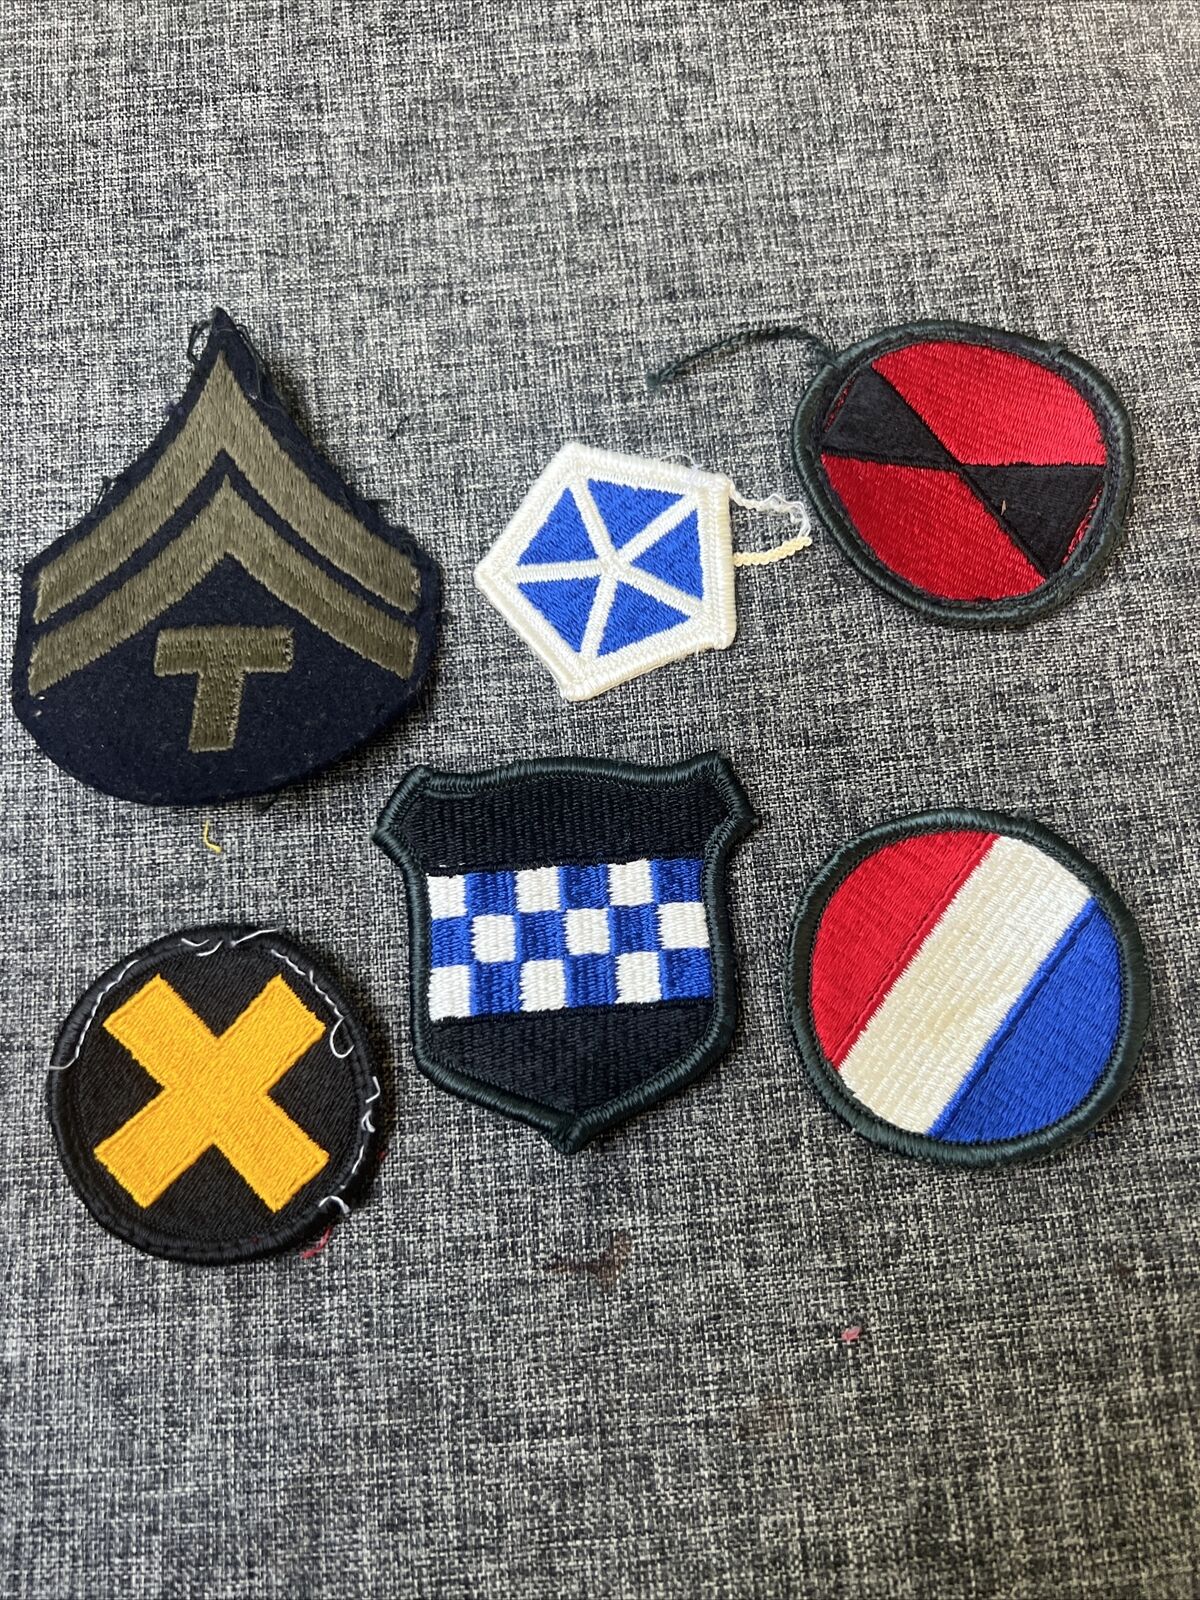 LOT OF 6 VINTAGE MILITARY PATCHES